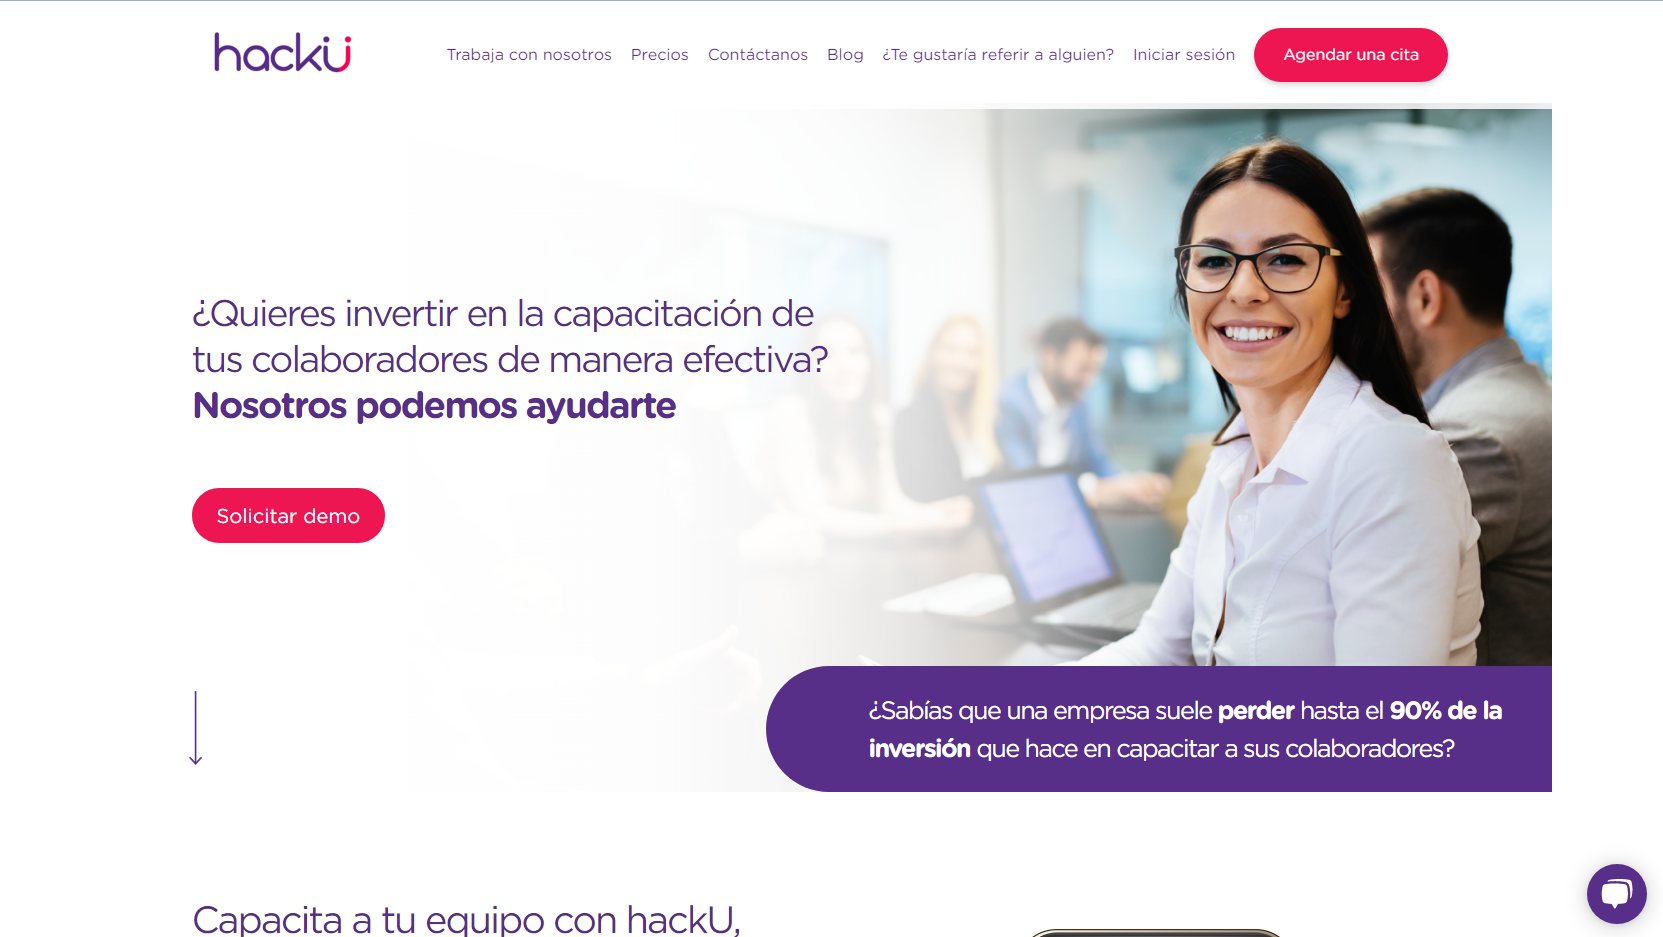 Make learning exciting with hackU